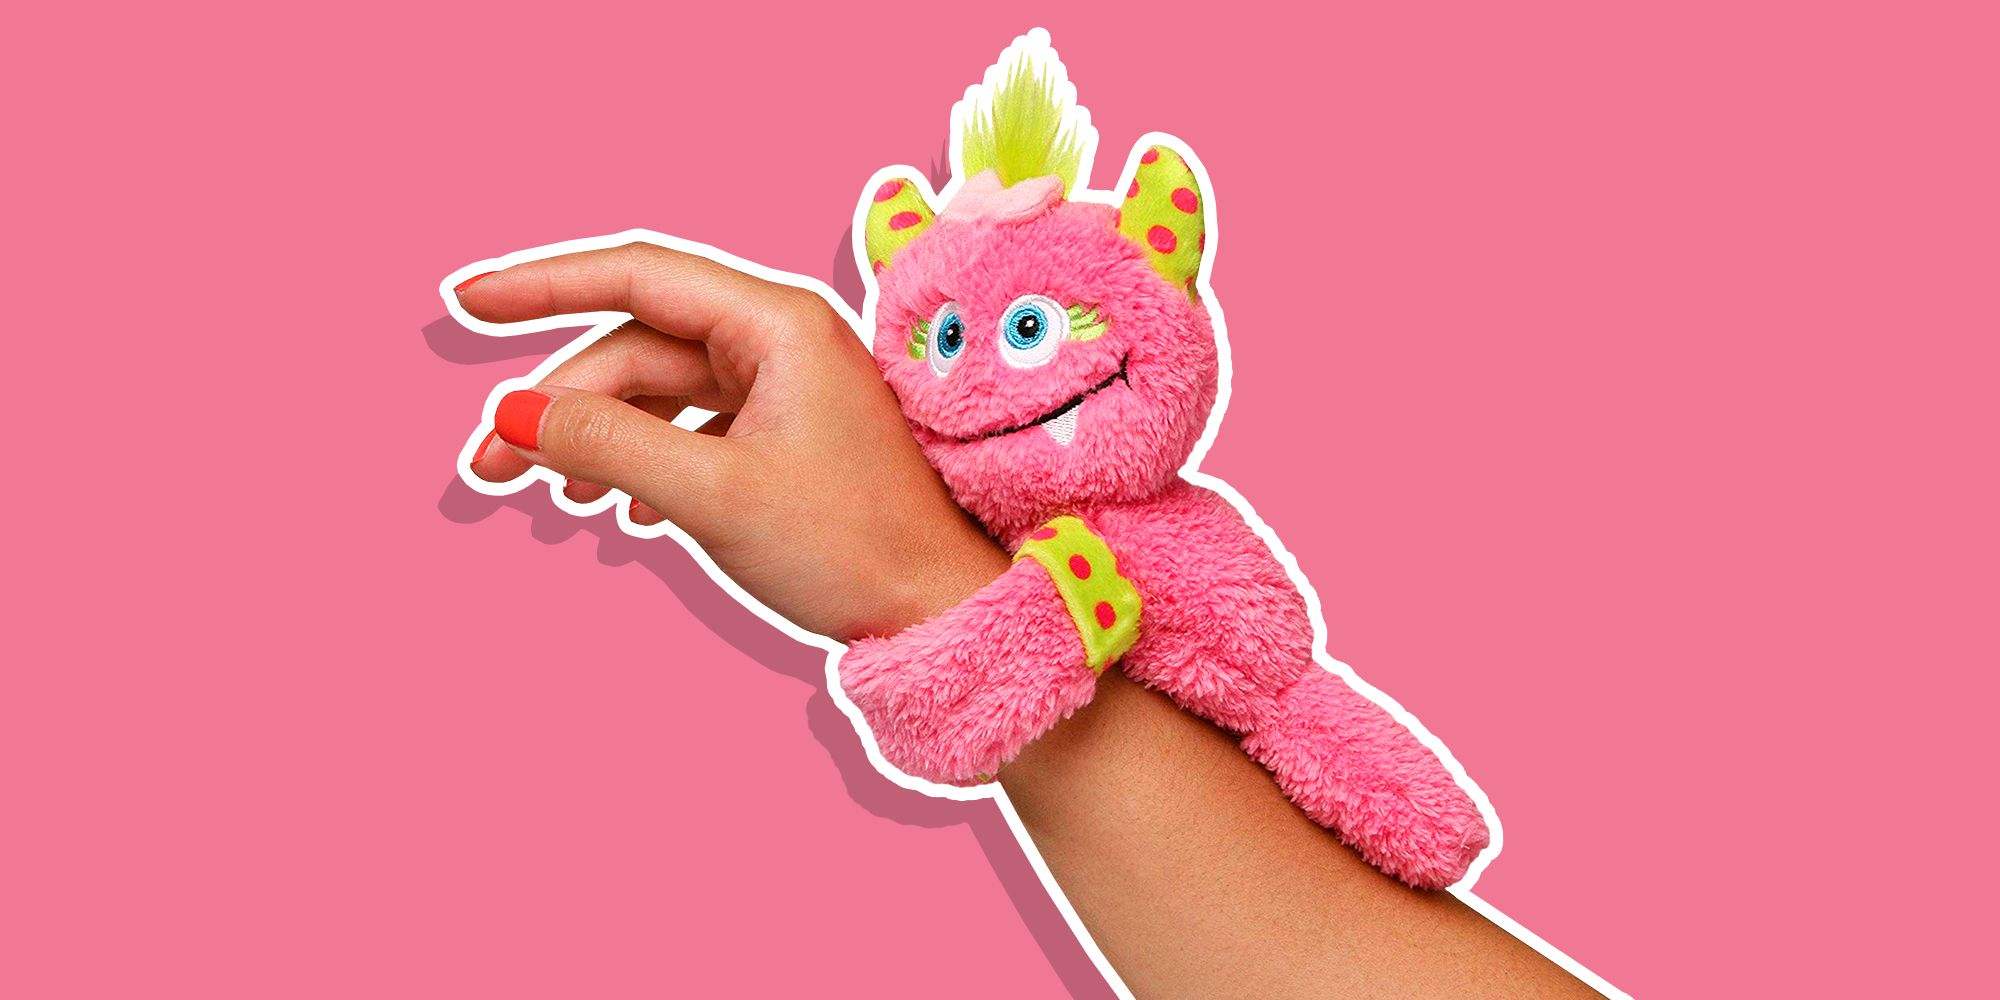 pink monster toy